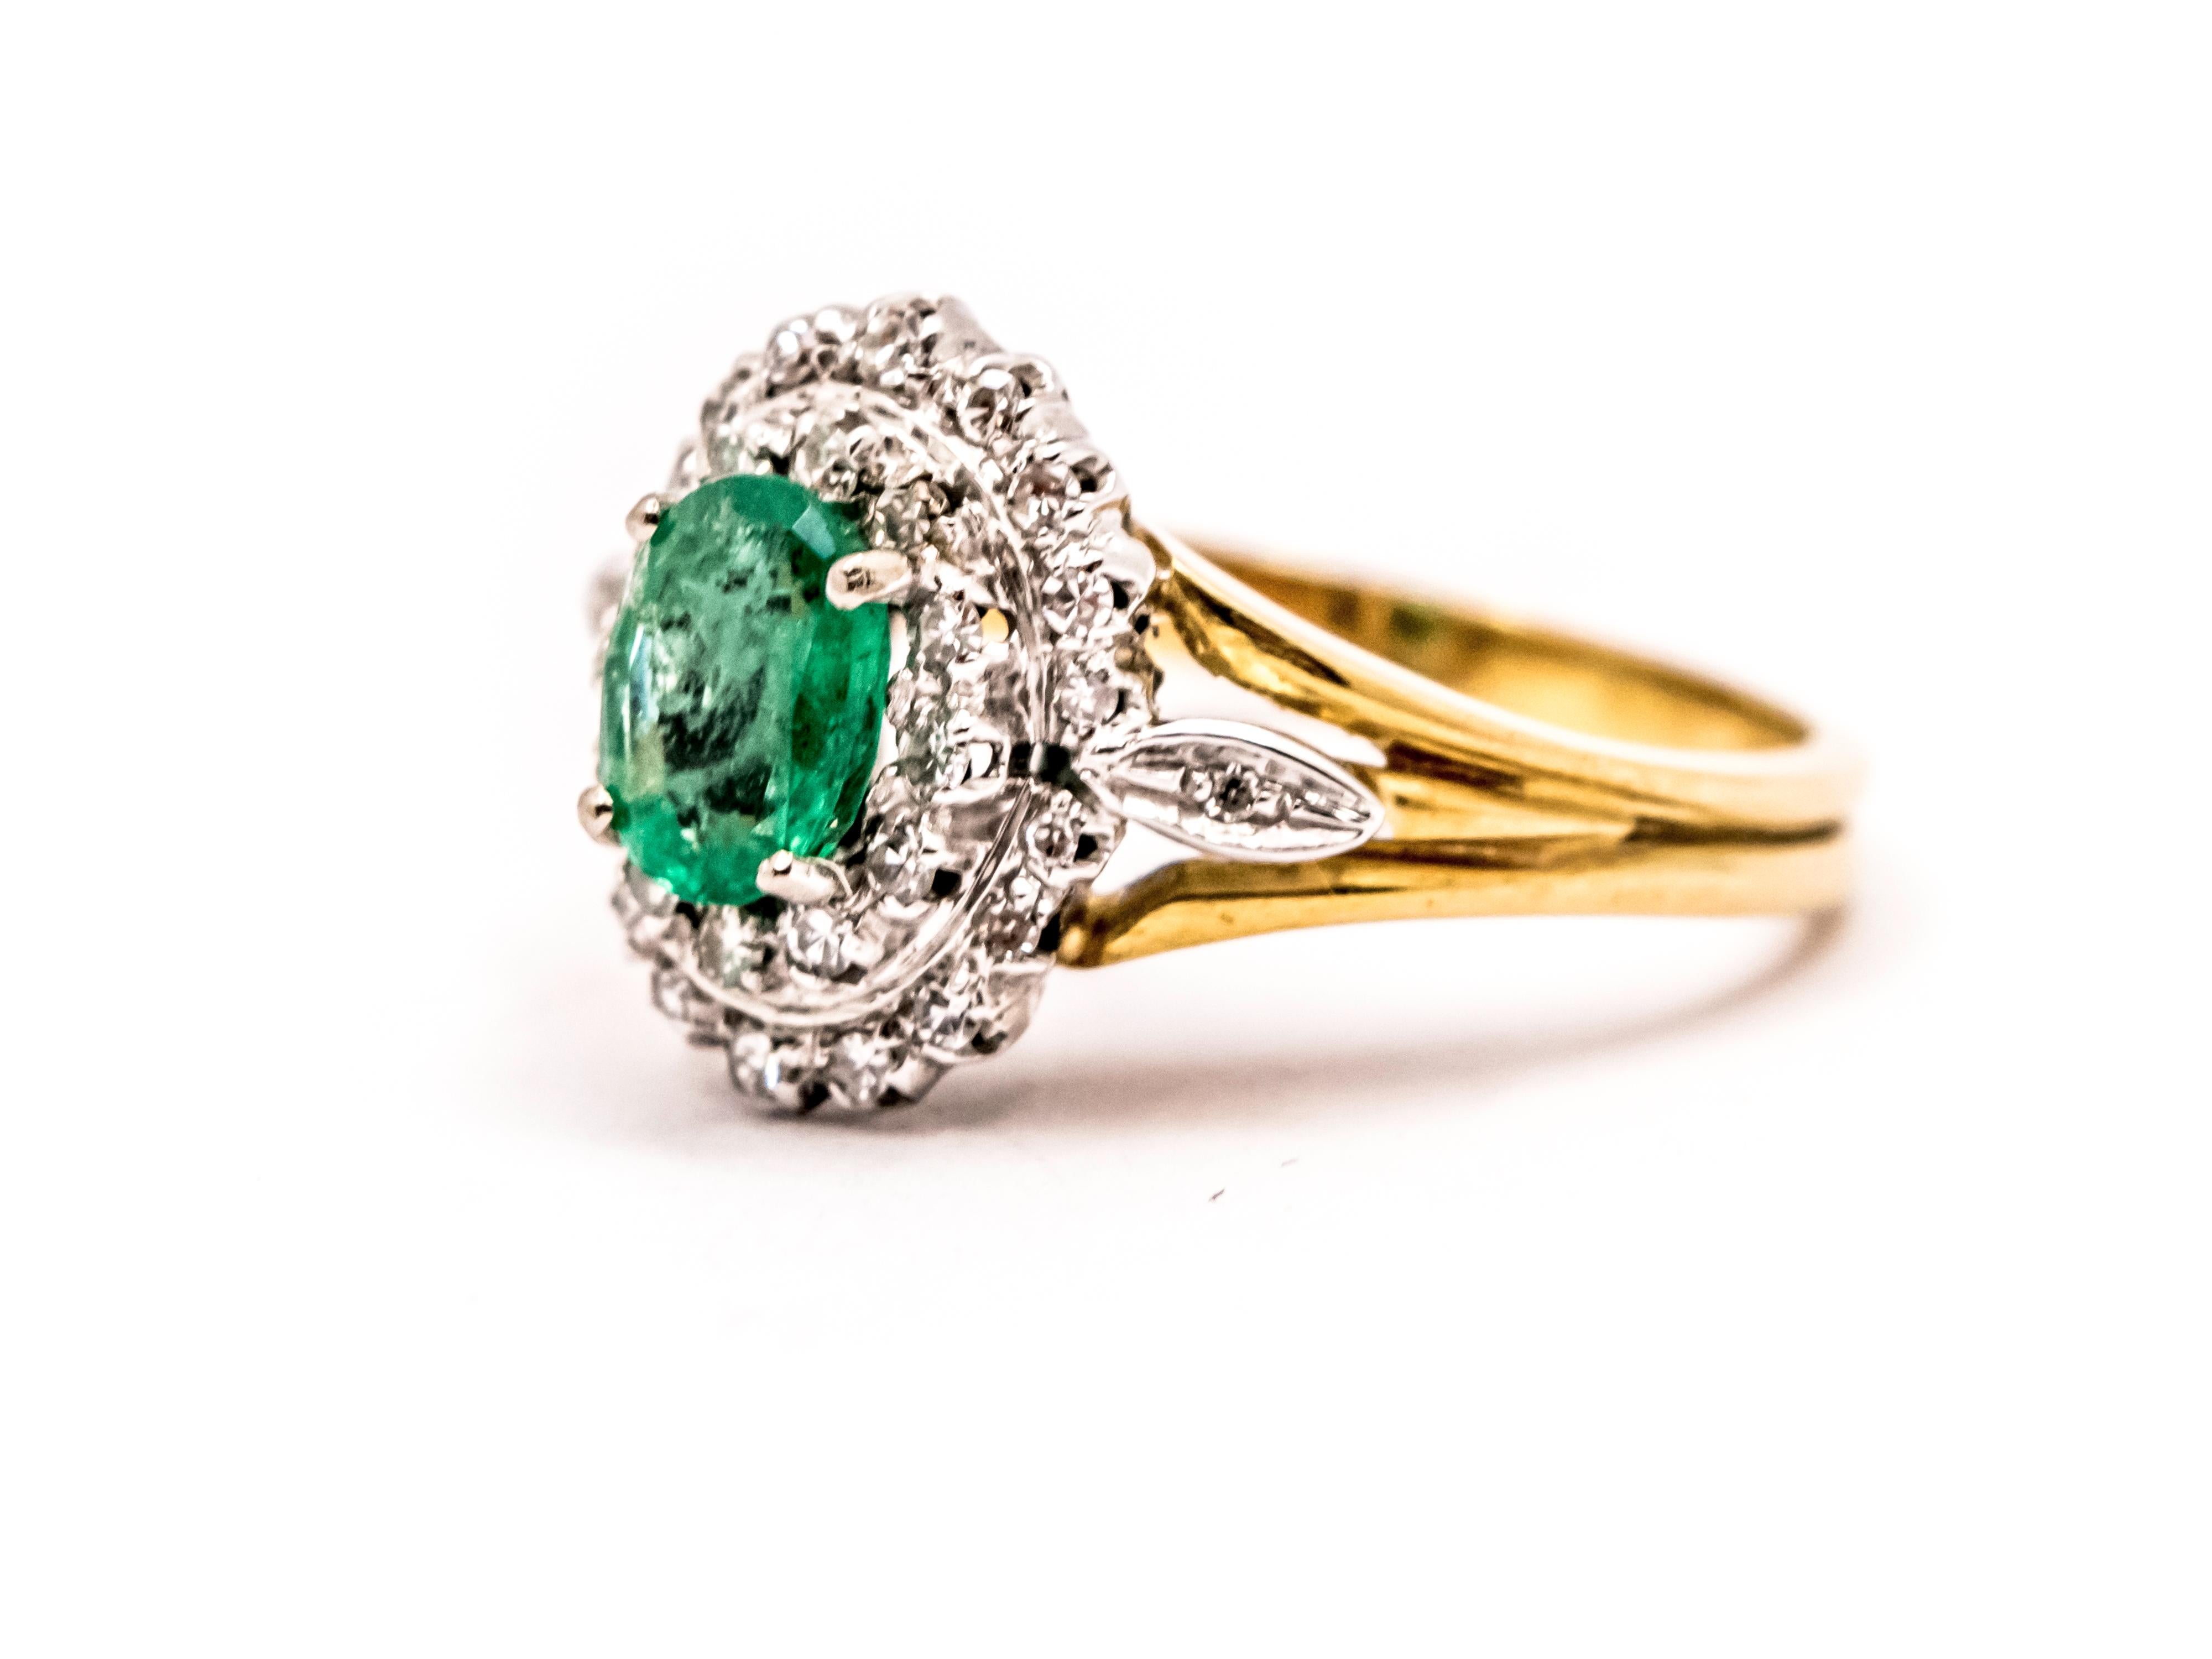 A classic 1940s ring in 18kt yellow and white gold.
The band part is yellow gold while the part where the stones are set is white gold.
This creates a beautiful color contrast between the bright green of the Emerald and the Diamonds.
The center